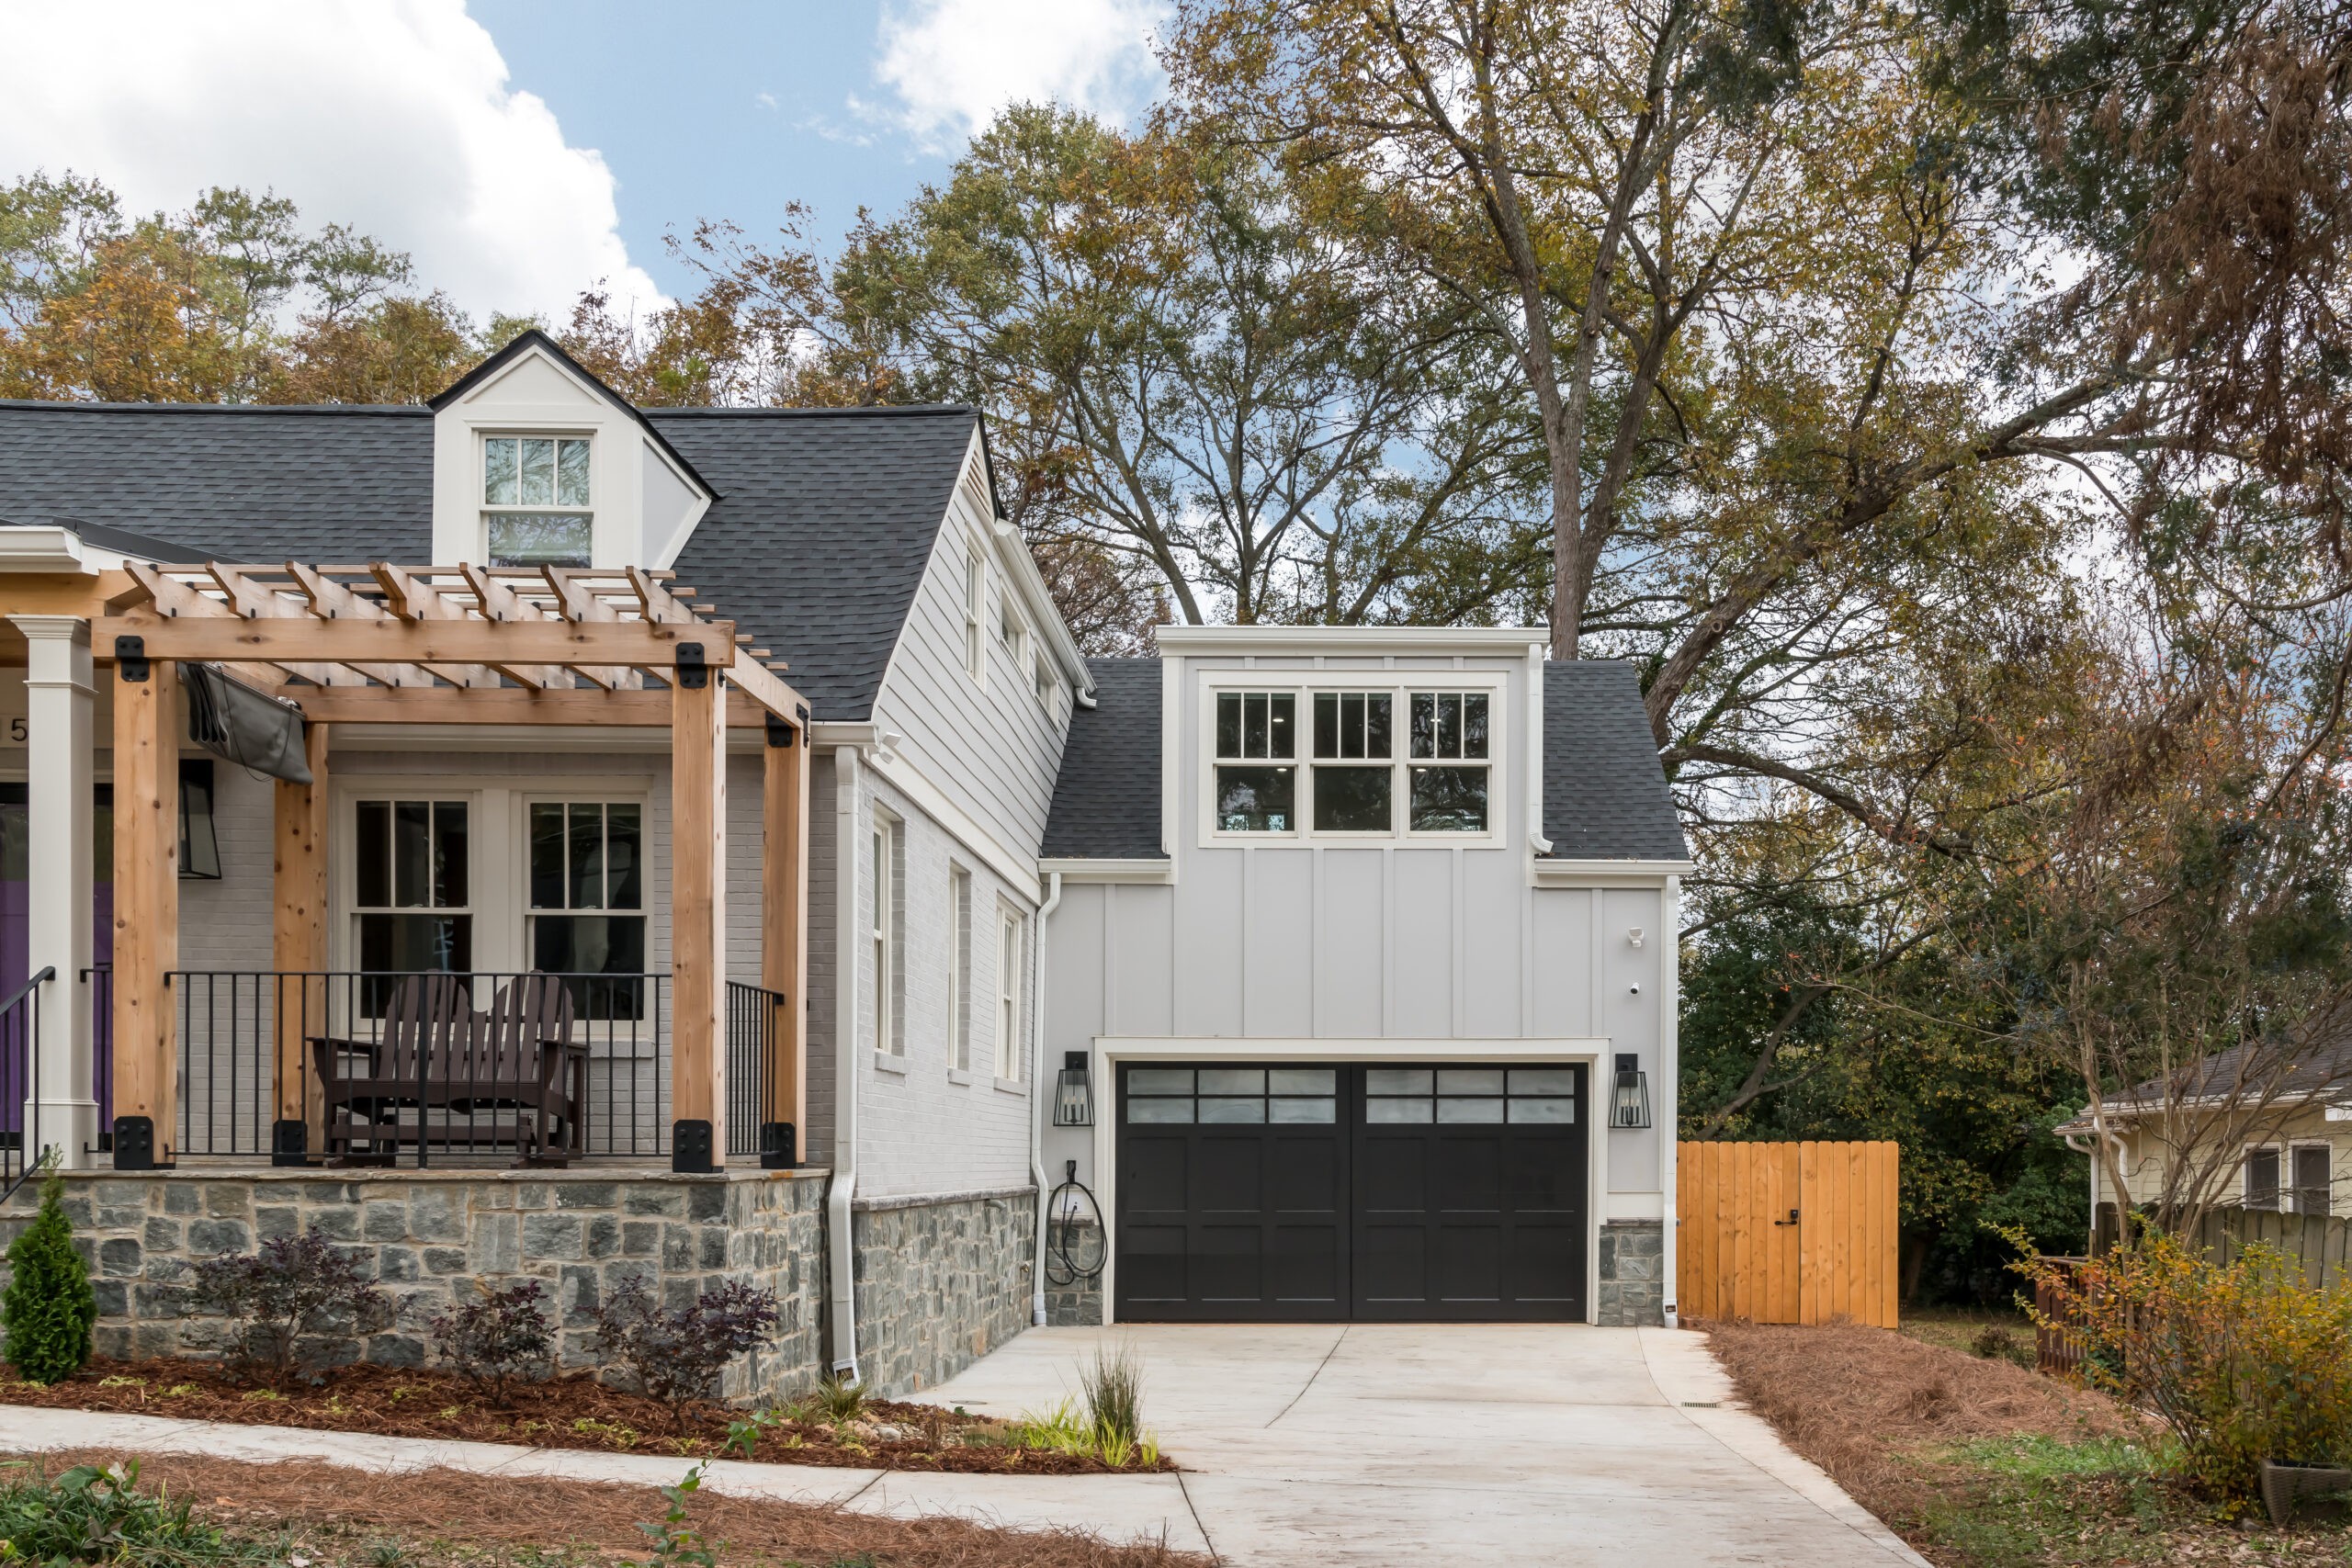 Beautiful Atlanta Garage Addition COVER PIC AND 1ST PIC